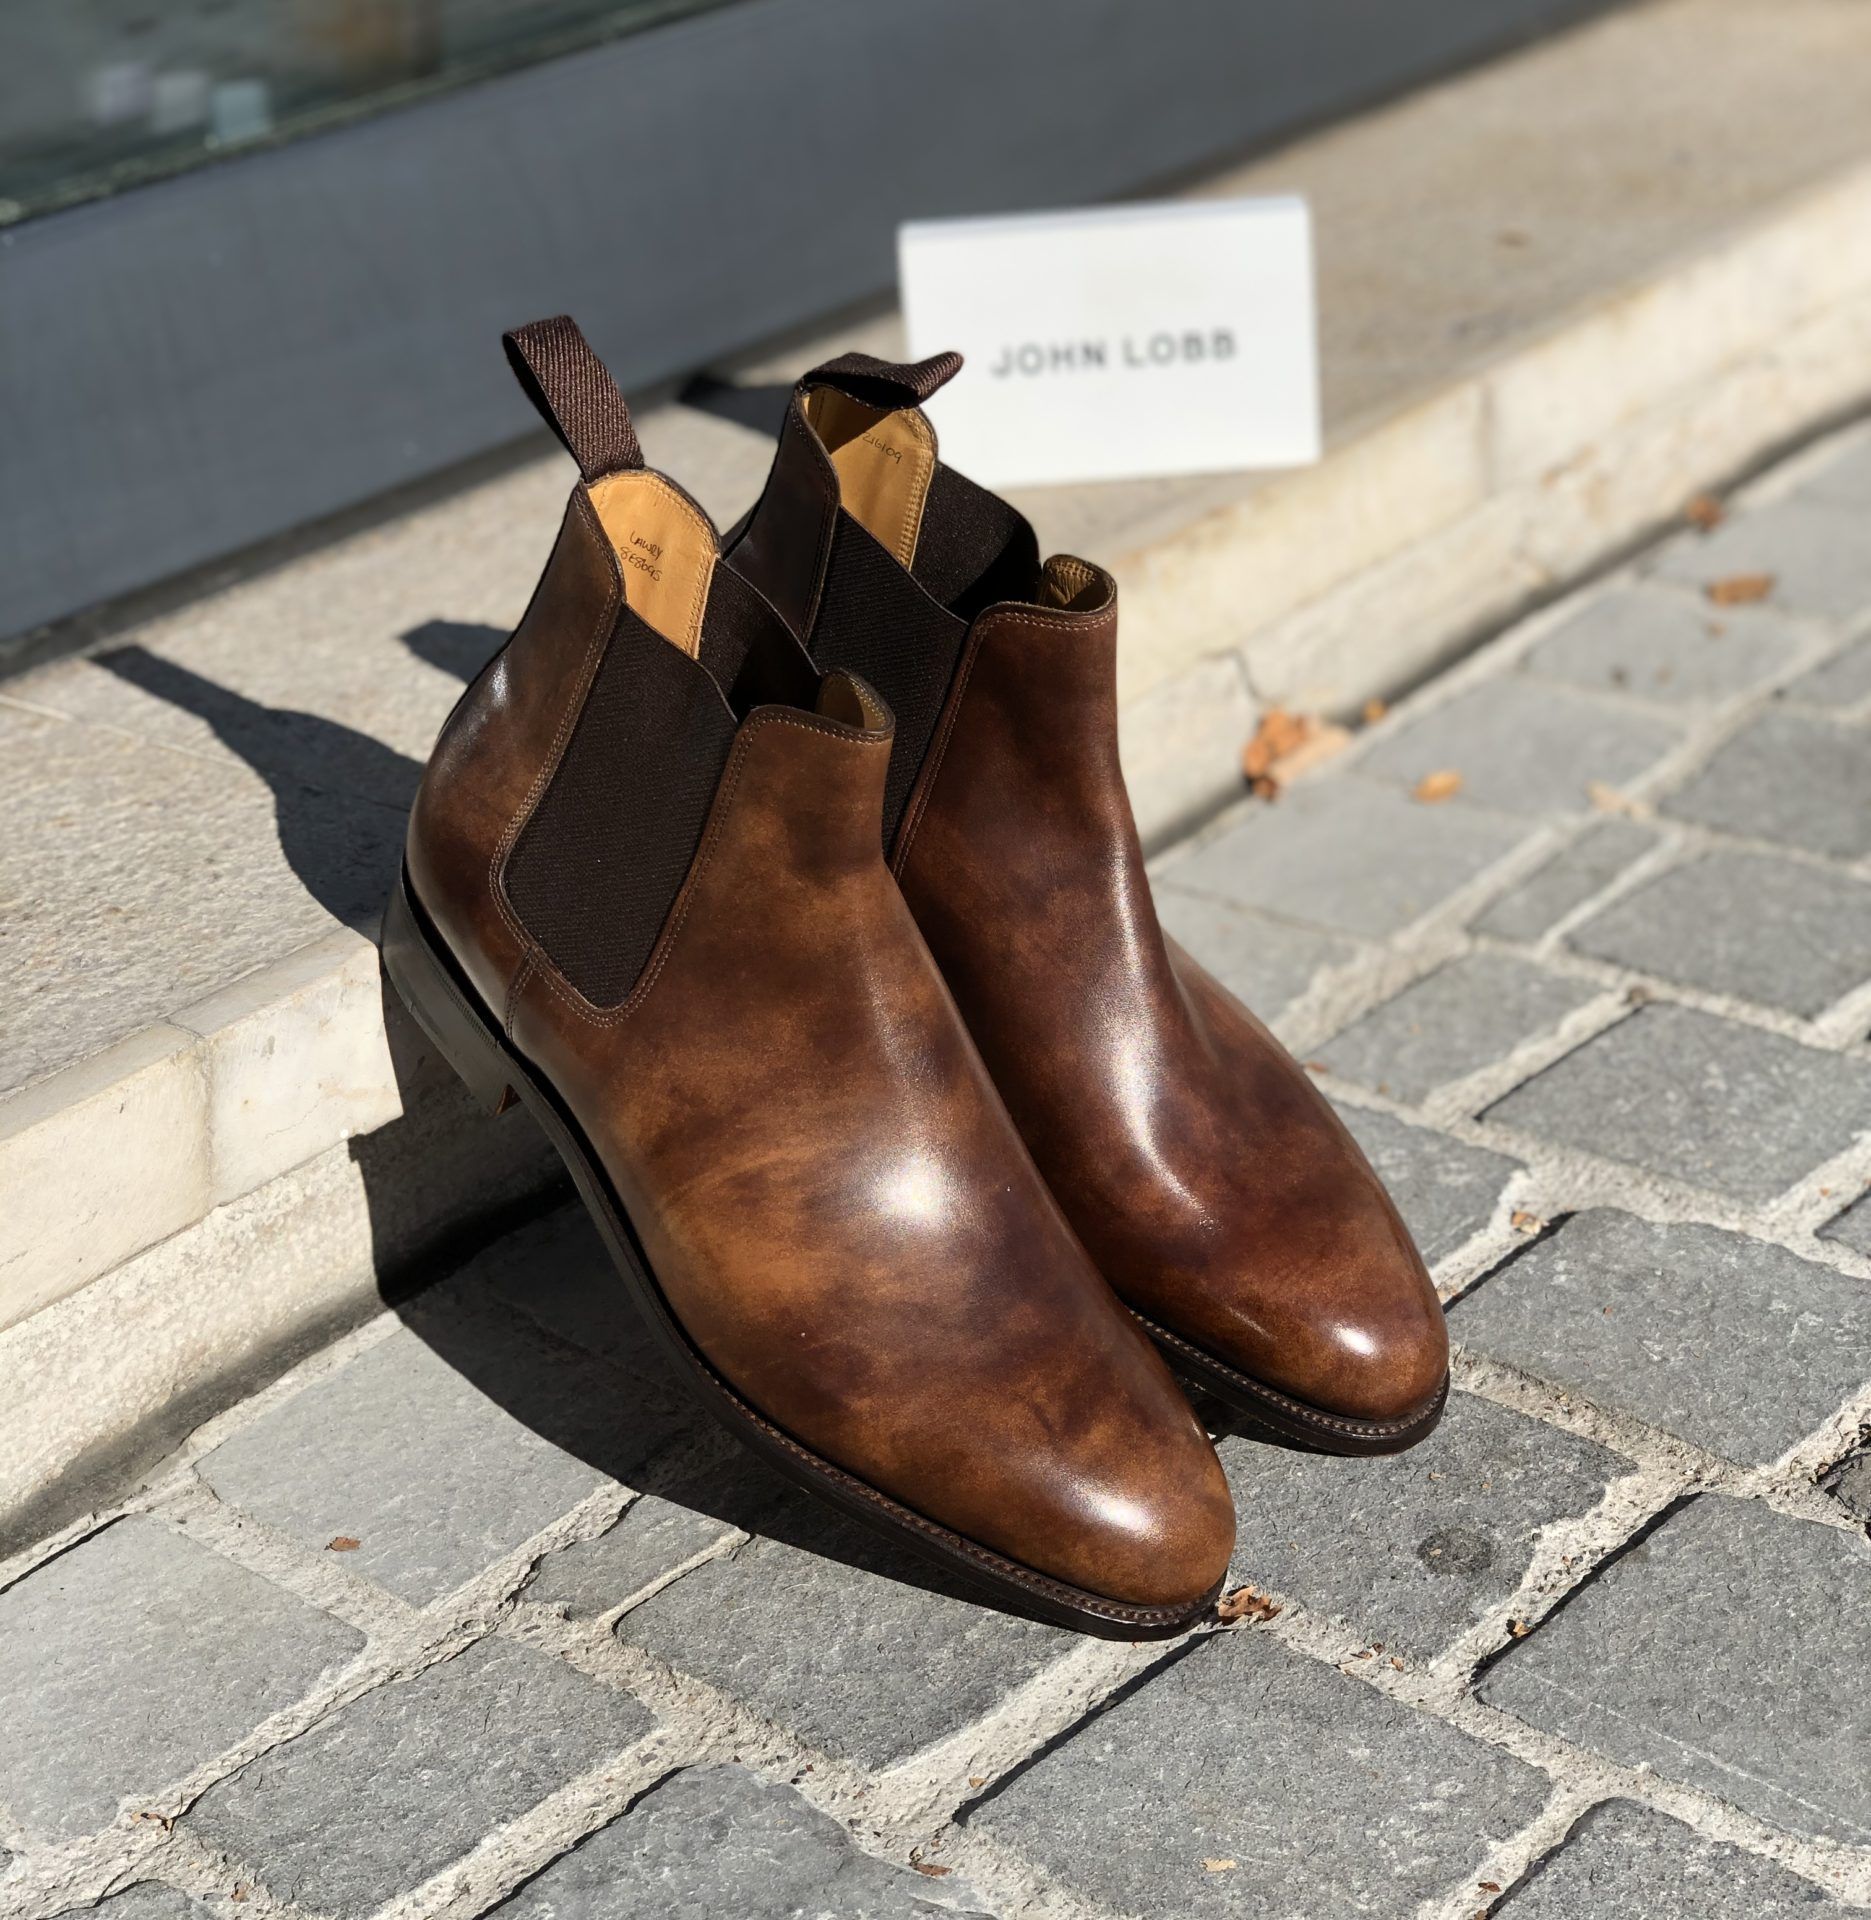 rolige Stavning peregrination john lobb lawry chelsea boots - OFF-51% >Free Delivery